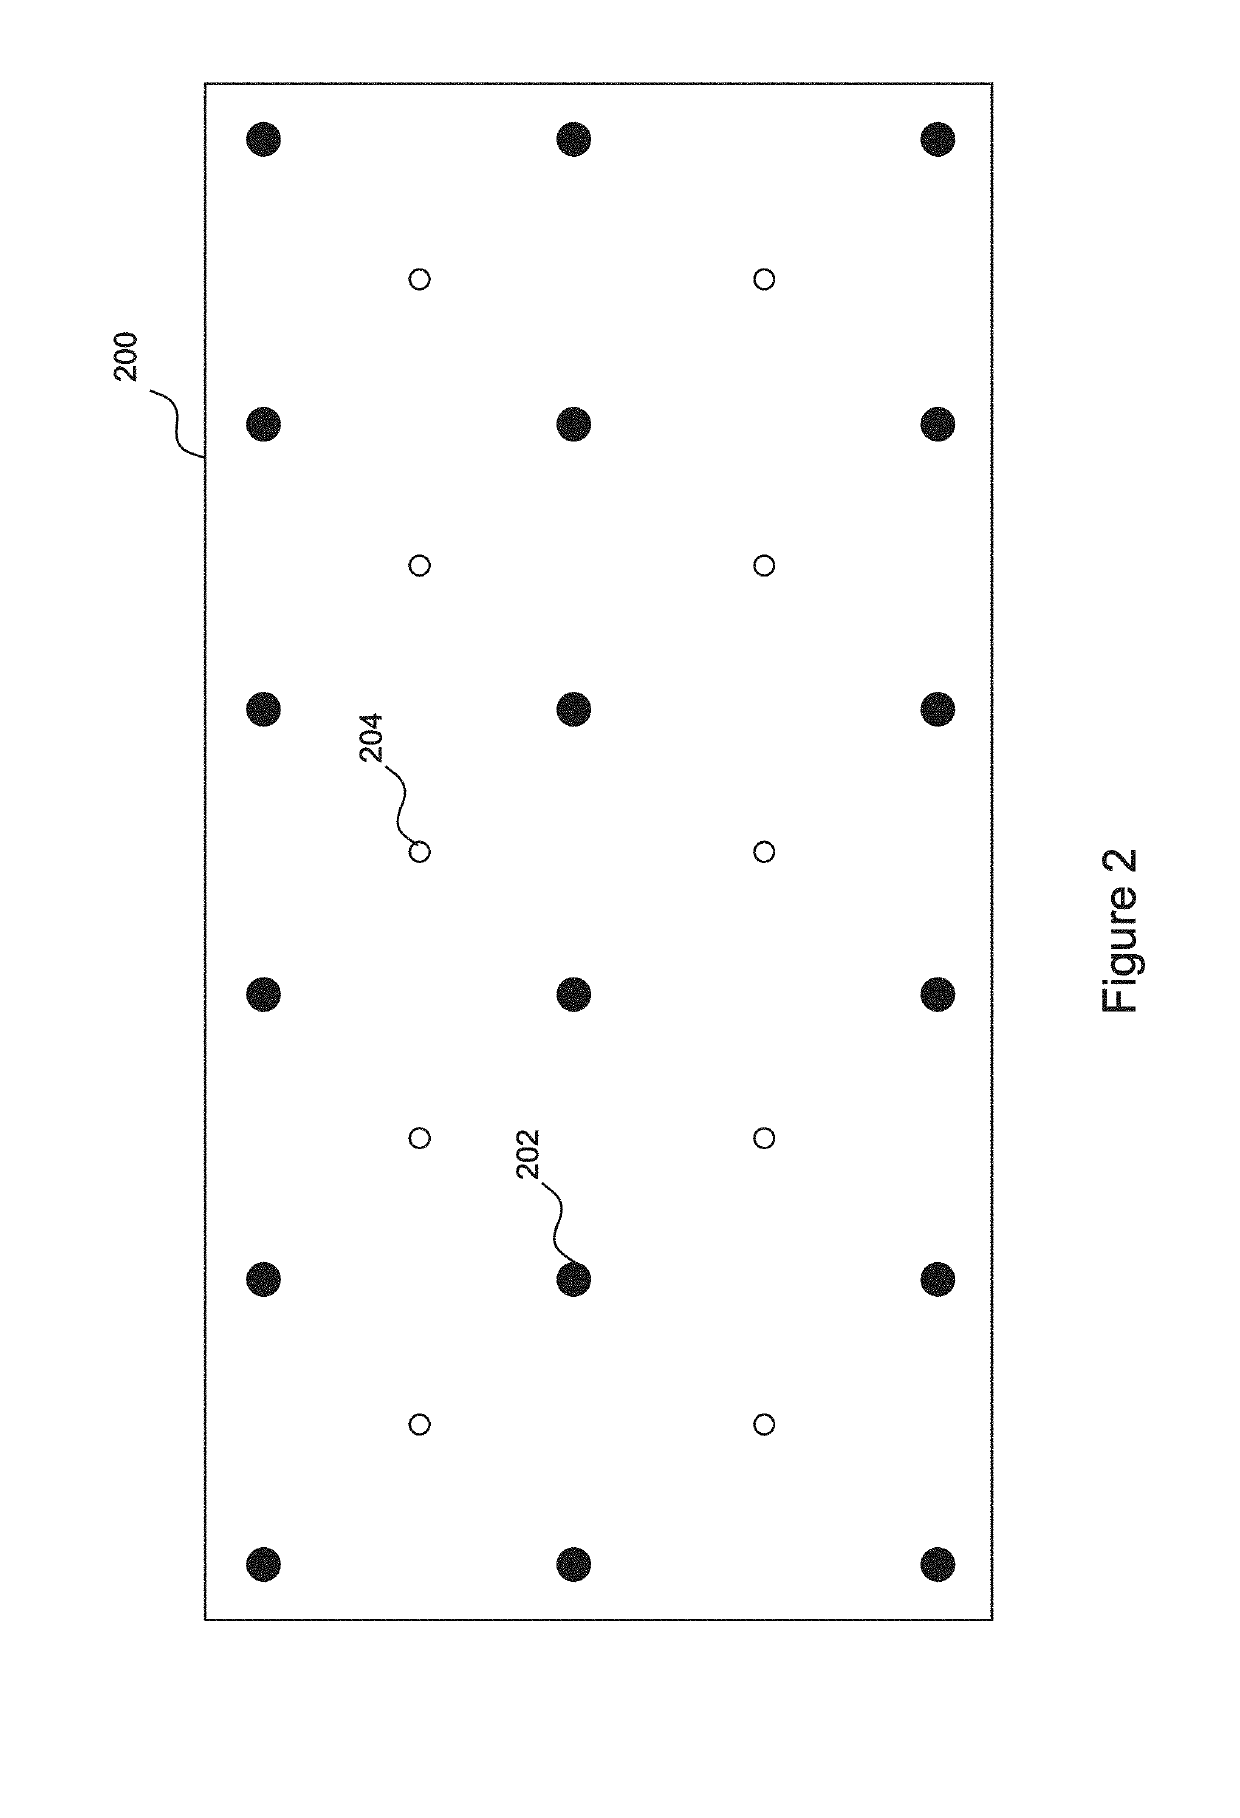 Apparatus and method for establishing and growing vegetation in arid environments